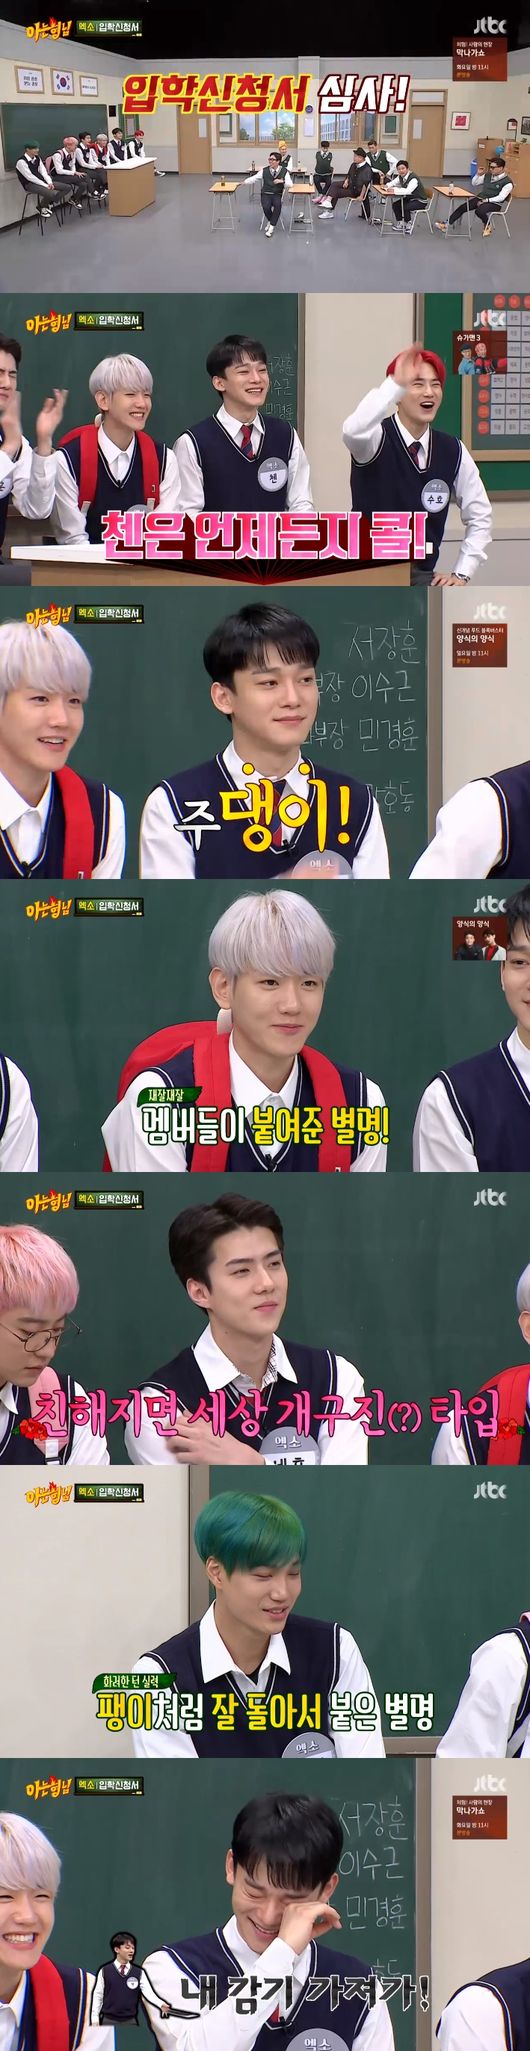 EXO showed off its witty dedication.On the 7th JTBC entertainment Knowing Bros, EXO appeared and showed a sense of entertainment.On this day, Kang Ho-dong looked at EXO members and asked, Is there less number than last time? Baekhyun said, EXO D.O. and Xiumin are now in the army.I can see it there. Kang Ho-dong said, Did you come only xo? Did not you come to the police? He expressed his love for EXO, saying that he was EXO.Kim Hee-chul asked Kai, I saw you imitating you well, and Kai, who was laughing, was embarrassed, saying, Is that me? The video went out and Kai laughed, Its okay.Kang Ho-lung asked her about her appearance, and Chanyeol proudly picked her as the No. 1 player, followed by Sehun in the No. 2 and Suho in the No. 3.Kai laughed, saying, Its tense. Suho, who received the same question, picked himself as the first and second, Sehun and third.Followed by Baekhyun in fourth, Chen in fifth, and Chanyeol in sixth.Chanyeol laughed and said, Its okay, I know the arts.Kim Young-chul told Kai, I care more about my body than my face. So the members of Ship said, Like your brother?When I shower, the person who sings well is singing, and the person who dances well is dancing and washing.Baekhyun said that the whole body is a little bit, but the upper body is okay, and Kai said, The whole body is dirty. Chen said, I am the most decent and decent.So Su-geun said, Thats EXO D.O., Chen replied, Of the people here now.The members said they had not been able to visit because they had not had time yet. Kai said, I have so many contacts with Xiumin.I honestly thought I would come two or three times a week. The EXO member said, Xiumin has always led us, but nowadays it is scattered. The application for admission was then released.Suho took the nickname well and wrote it down as angle. Chen said, Jung Lee and Su Keun said, I would like to write call.Baekhyun then said dud Judin, while Sehun said dud Kai, a naughty dud and tud Sehun, was dai.Then, as a hopeful mate, Chen chose Kang Ho-dong, who laughed when he said the reason was to move the cold.I have never been here before and have never sat down with Hodong, he said.Chanyeol said he bought a building a month ago and became a classmate with Seo Jang-hoon.So Seo Jang-hoon said, Its EXO. ... Later, I will live more than I will live, I will live less than me. Kai changed from the remaining person to Sangmin.He wrote a letter of regret and laughed because he was a fan. He then wrote the merits because he wanted to do well in the cry of calm.The Crying for Employment game began. First, Chen and Chanyeol teamed up to solve the problem.The two men solved the problem easily, but began to wander in front of the growl problem: Chanyeol understood the representative song as a tempo song and eventually failed to hit it.The two men had three problems.Second came Baekhyun and Kai, who explained the hotpack with The one that sticks when its cold in winter, but Kai said, Who died in winter? What is it? Why did it die?What the hell is that? Put it on the dead man? he shouted.The two, who were passing the problem, then again Top Model on the hot pack and Baekhyun said in the padding.Kai looked down at the lower half of the body, saying, In your panties? The two men hit two problems.Suho and Sehun then made a Top Model, which Suho explains, saying I cant hear you, and laughed.Suho wrote We made a comeback yesterday to explain Music Be EXO D.O. Sehun said, We settled the year-end.We recorded La EXO D.O. Star yesterday, he said.Sehun said, I can not hear any of it. Then Sehun and Kai, who are the worst, once again Top Model.Sehun explained to explain the Main Vocal: Kai dances, Chen what? and hard-fought Main Vocal by Kai.The two men had a difficult two-problem and showed a new song OBSESSION.Knowing Bros Screen Capture